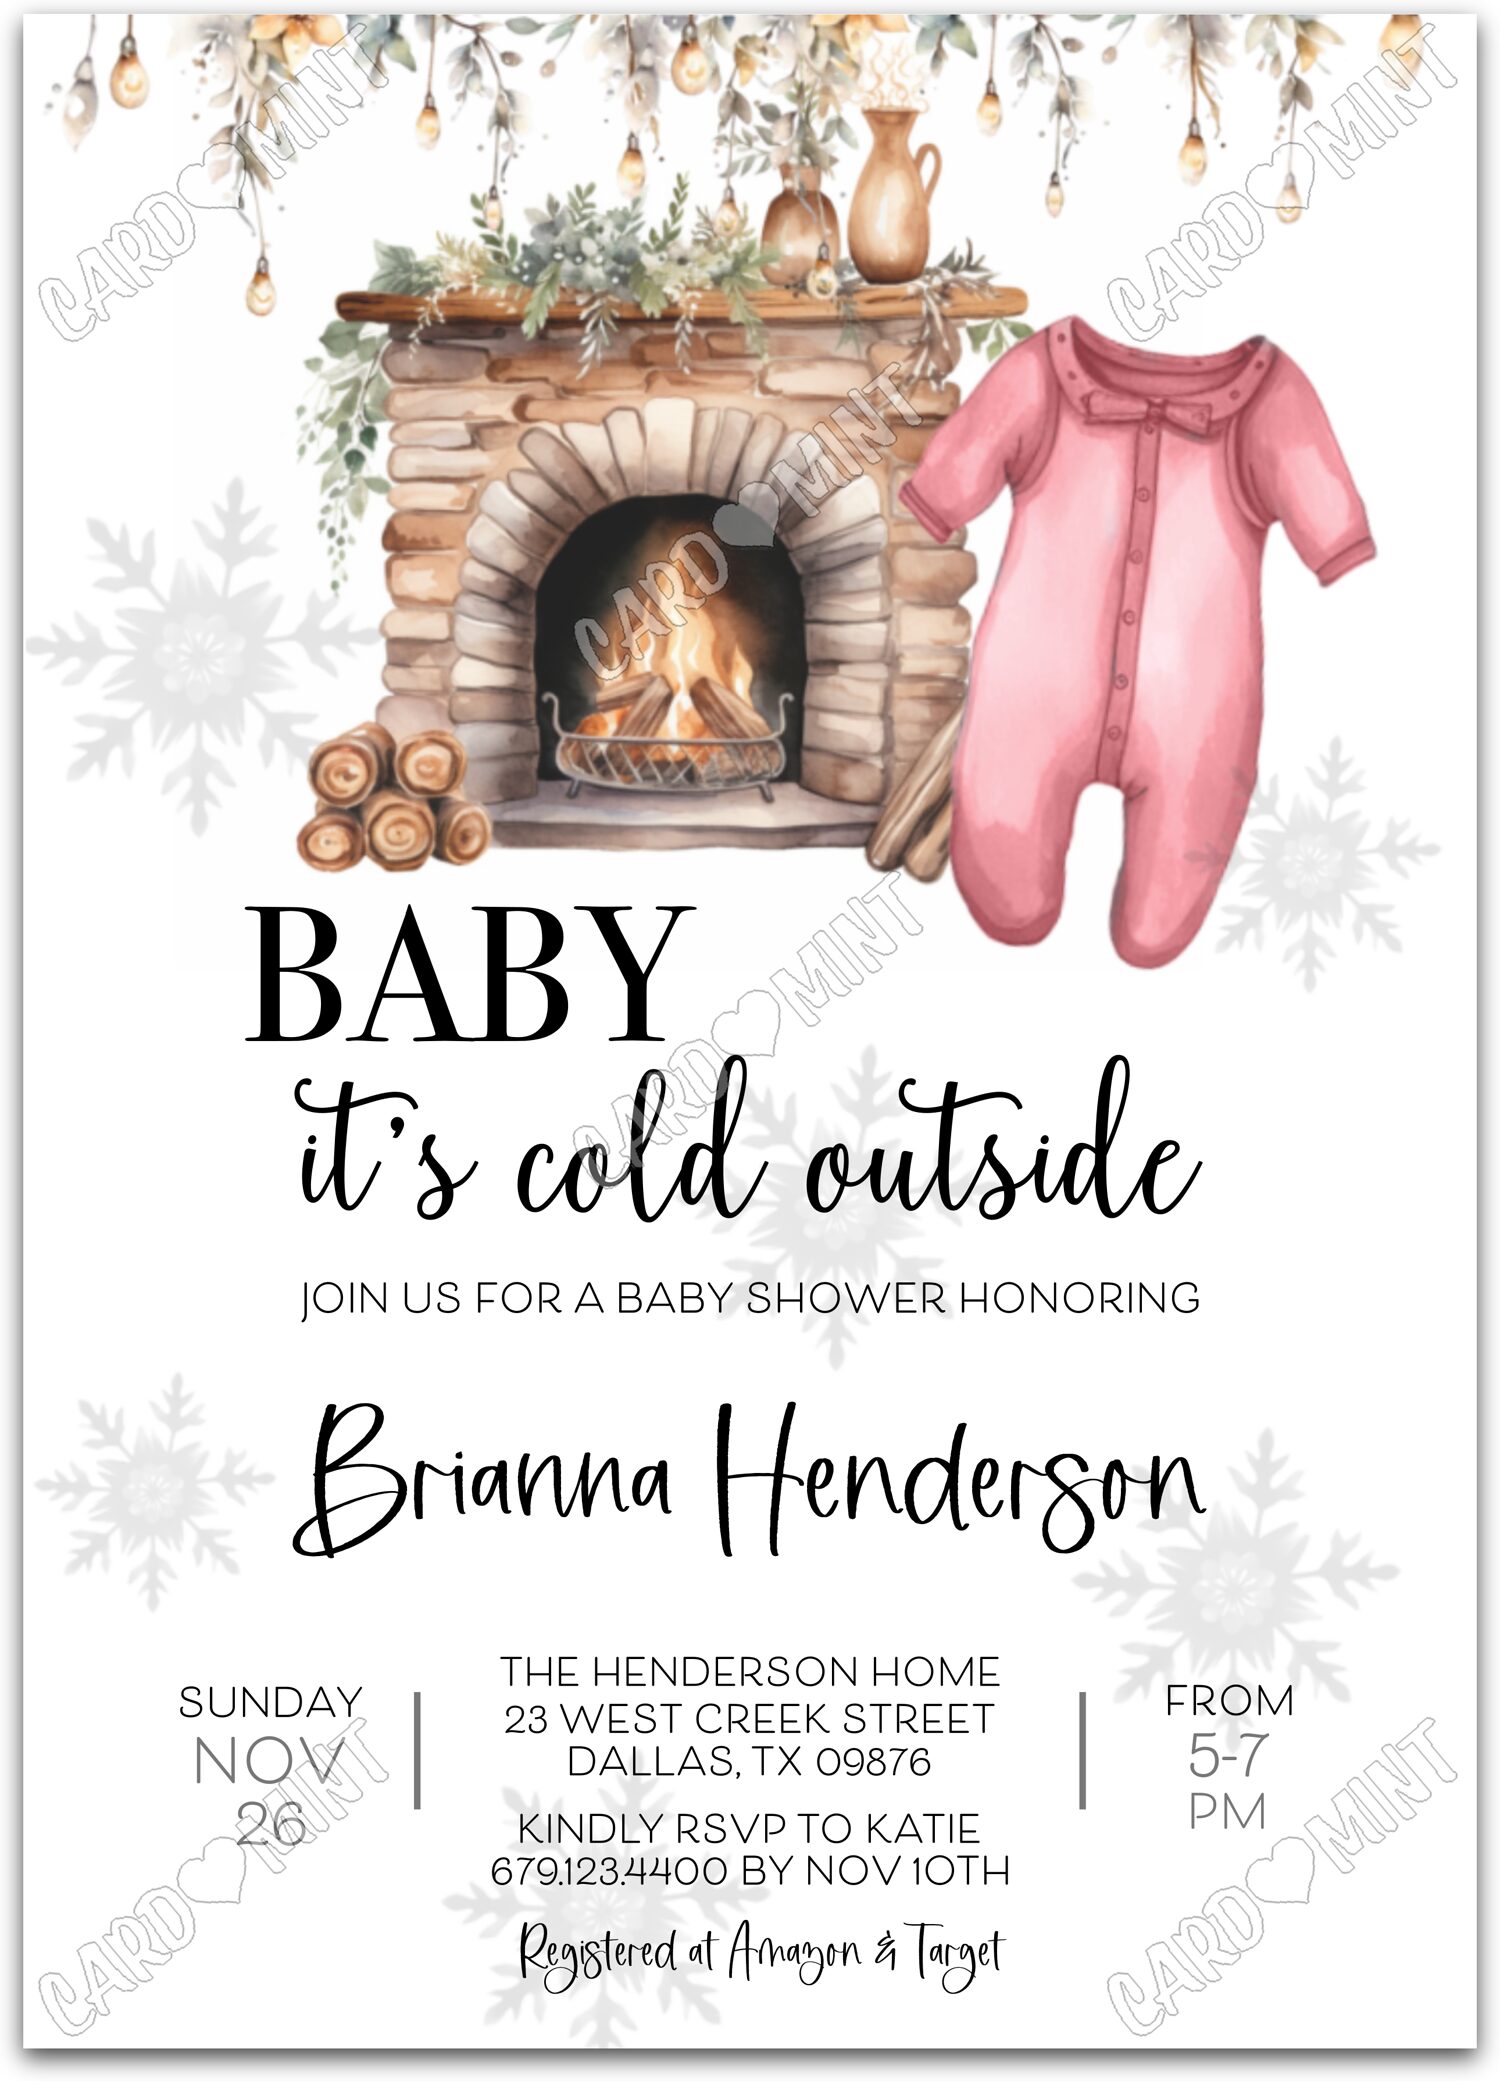 Editable Baby It's Cold Outside tan/pink fireplace & sleeper girl winter Baby Shower 5"x7" Invitation EV1151